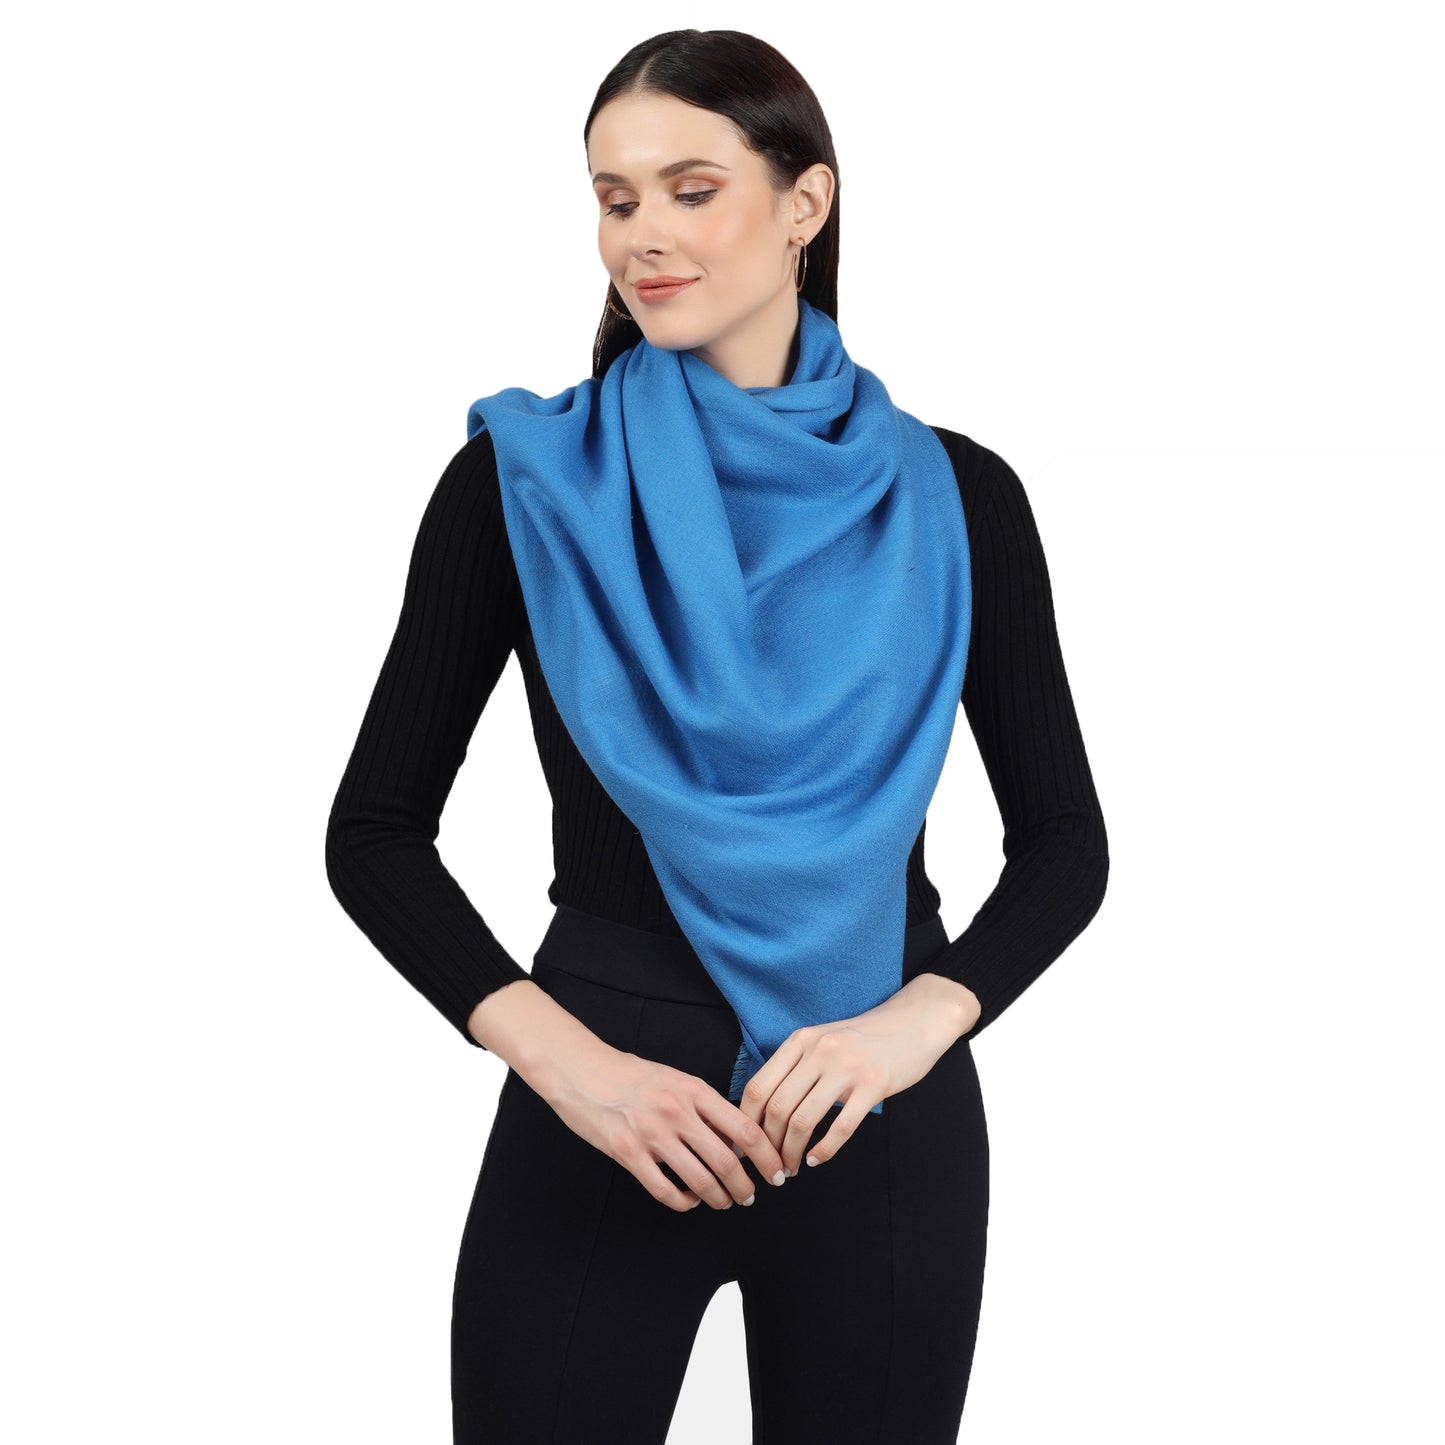 Image of a woman wearing a blue cashmere scarf wrapped around her neck in a stylish and elegant way. The scarf is folded in a neat and precise manner, and the blue color adds a pop of color to the woman's outfit. The scarf appears to be made with high-quality material, and its soft and luxurious texture is visible in the image. The woman's expression is confident and sophisticated, with a subtle smile on her lips.